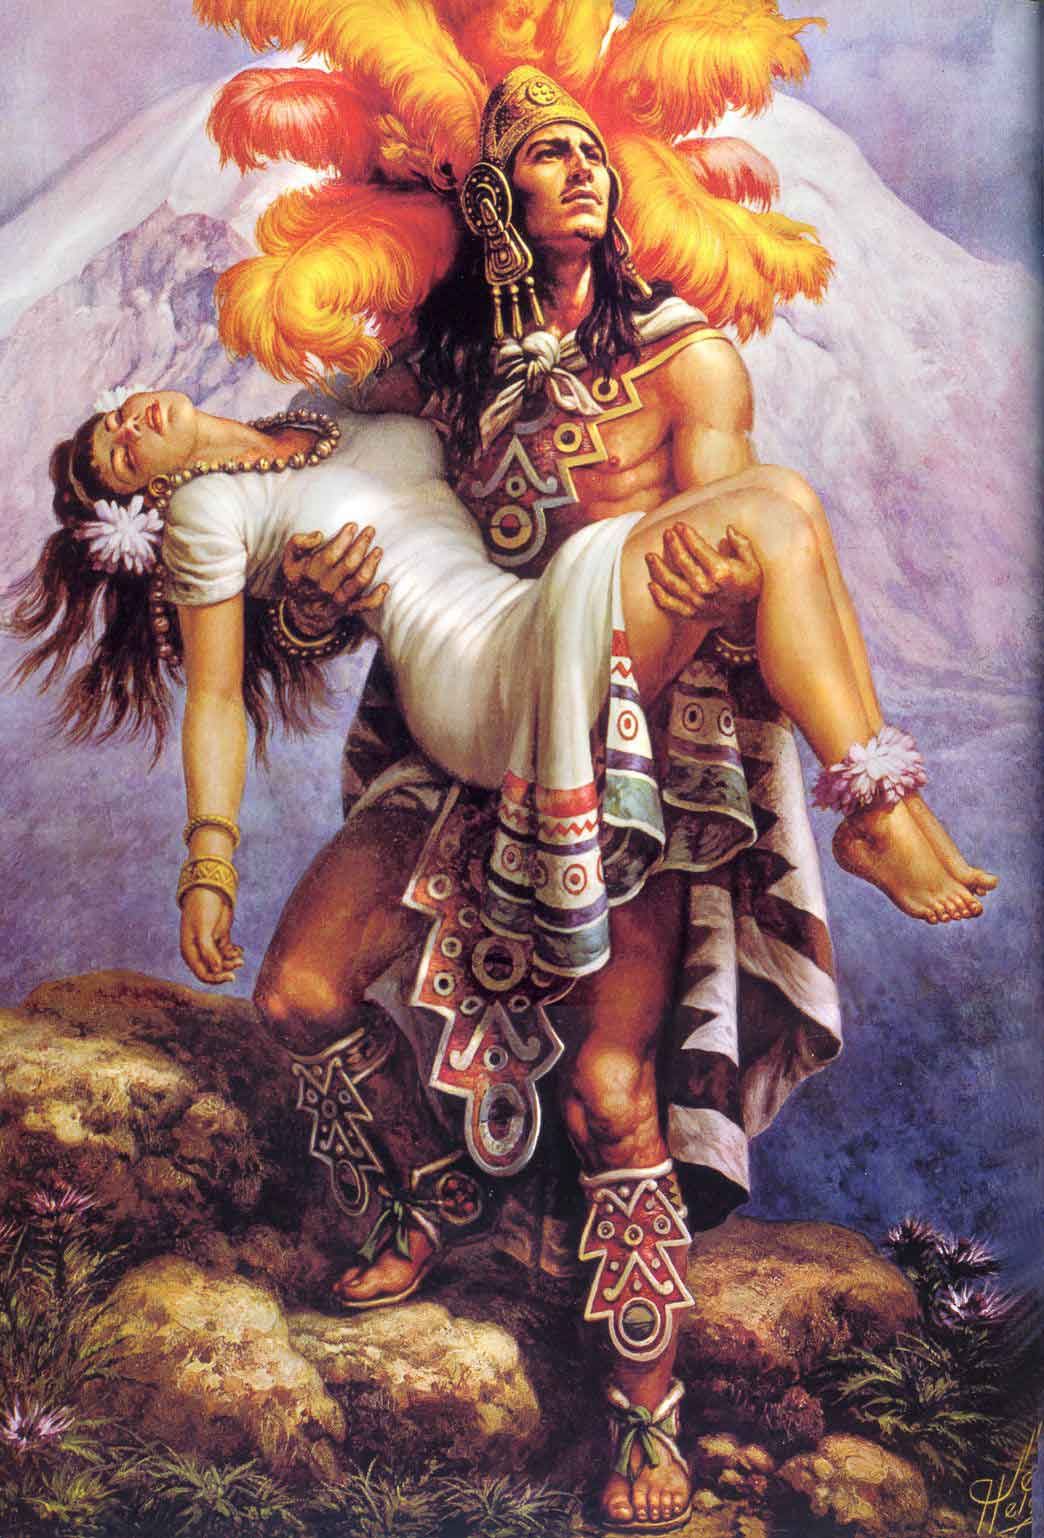 A painting of an Aztec man holding a woman